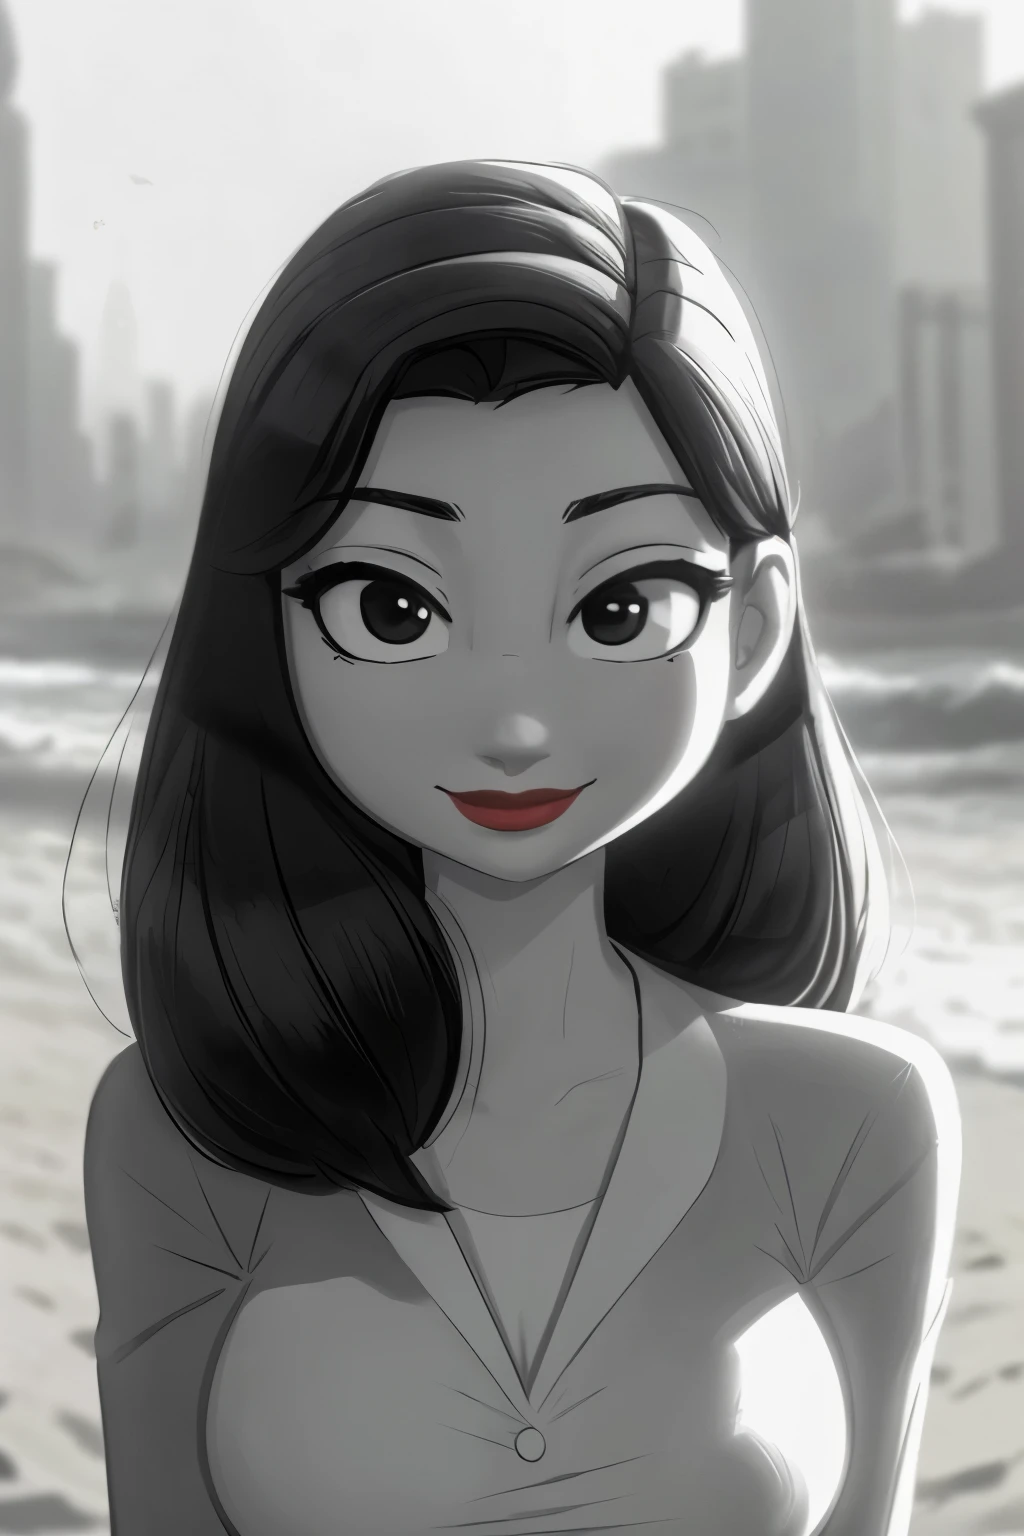 ((ultra quality)), ((tmasterpiece)), Meg, Paperman, (Black & White Style), (black and white cinema), ((Black, hairlong)), (Beautiful cute face), (beautiful female lips), Charming, ((sexy facial expression)), looking at the camera smiling softly, eyes slightly open, (Skin color: white), Body glare, ((detailed beautiful female eyes)), ((Black глаза глаза)), (juicy female lips), (red lipstick on the lips), (beautiful female hands), ((perfect female figure)), perfect female body, Beautiful waist, Gorgeous hips, Beautiful medium breasts, ((Subtle and beautiful)), stands seductively on the sand (), (sexy bikini) background: beach 50-60&#39;s, seaside, ((Depth of field)), ((high quality clear image)), (crisp details), ((higly detailed)), Realistic, Professional Photo Session, ((Clear Focus)), the anime